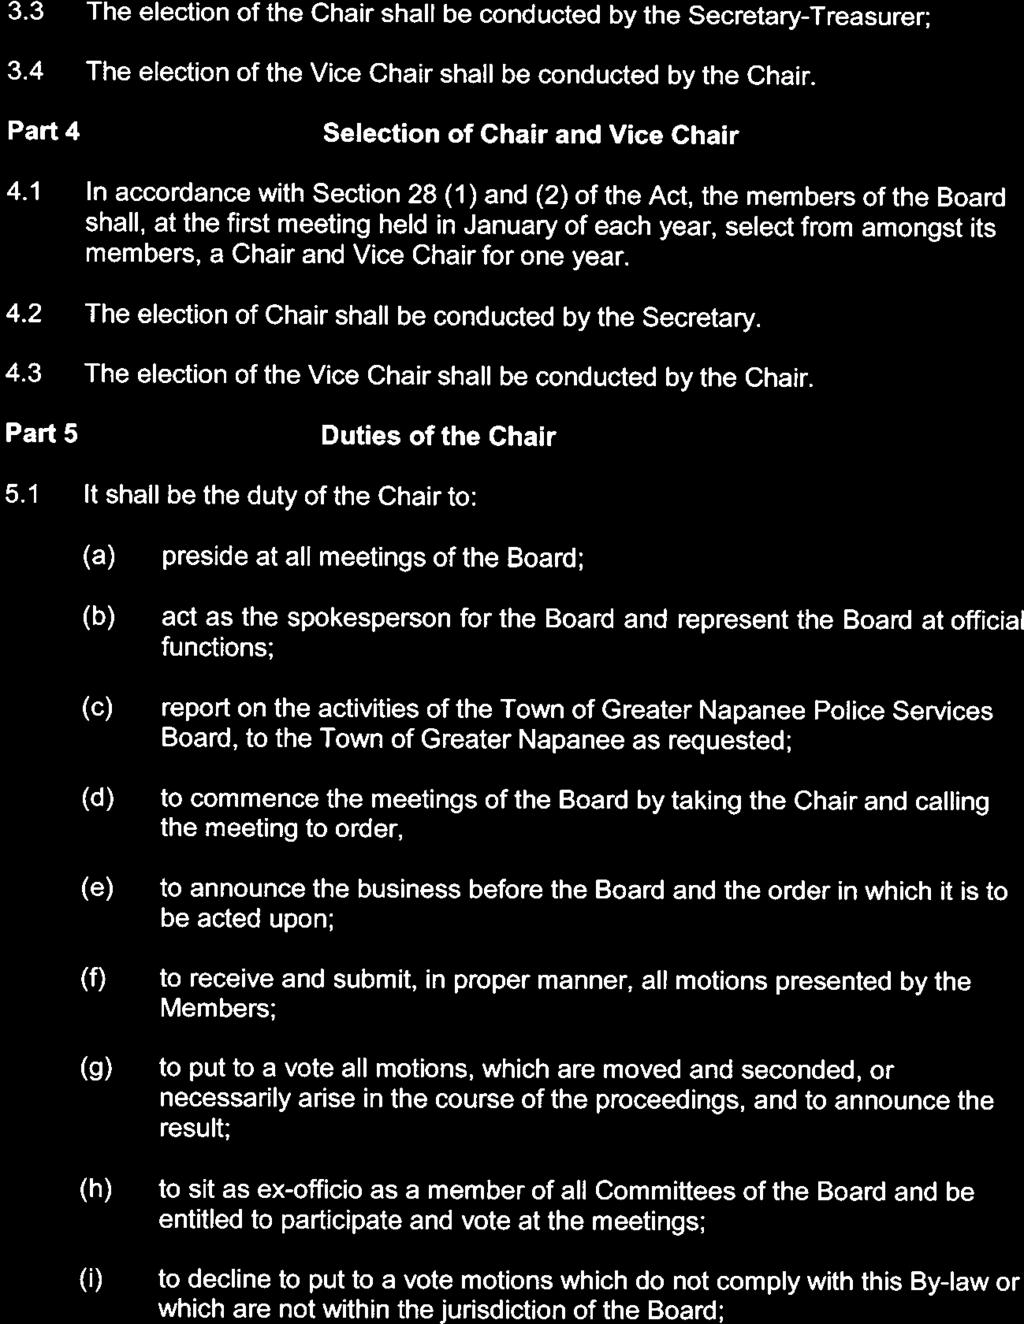 3.3 The election of the Chair shall be conducted by the Secretary-Treasurer; 3.4 The election of the Vice Chair shall be conducted by the Chair. Part 4 Selection of Chair and Vice Chair 4.